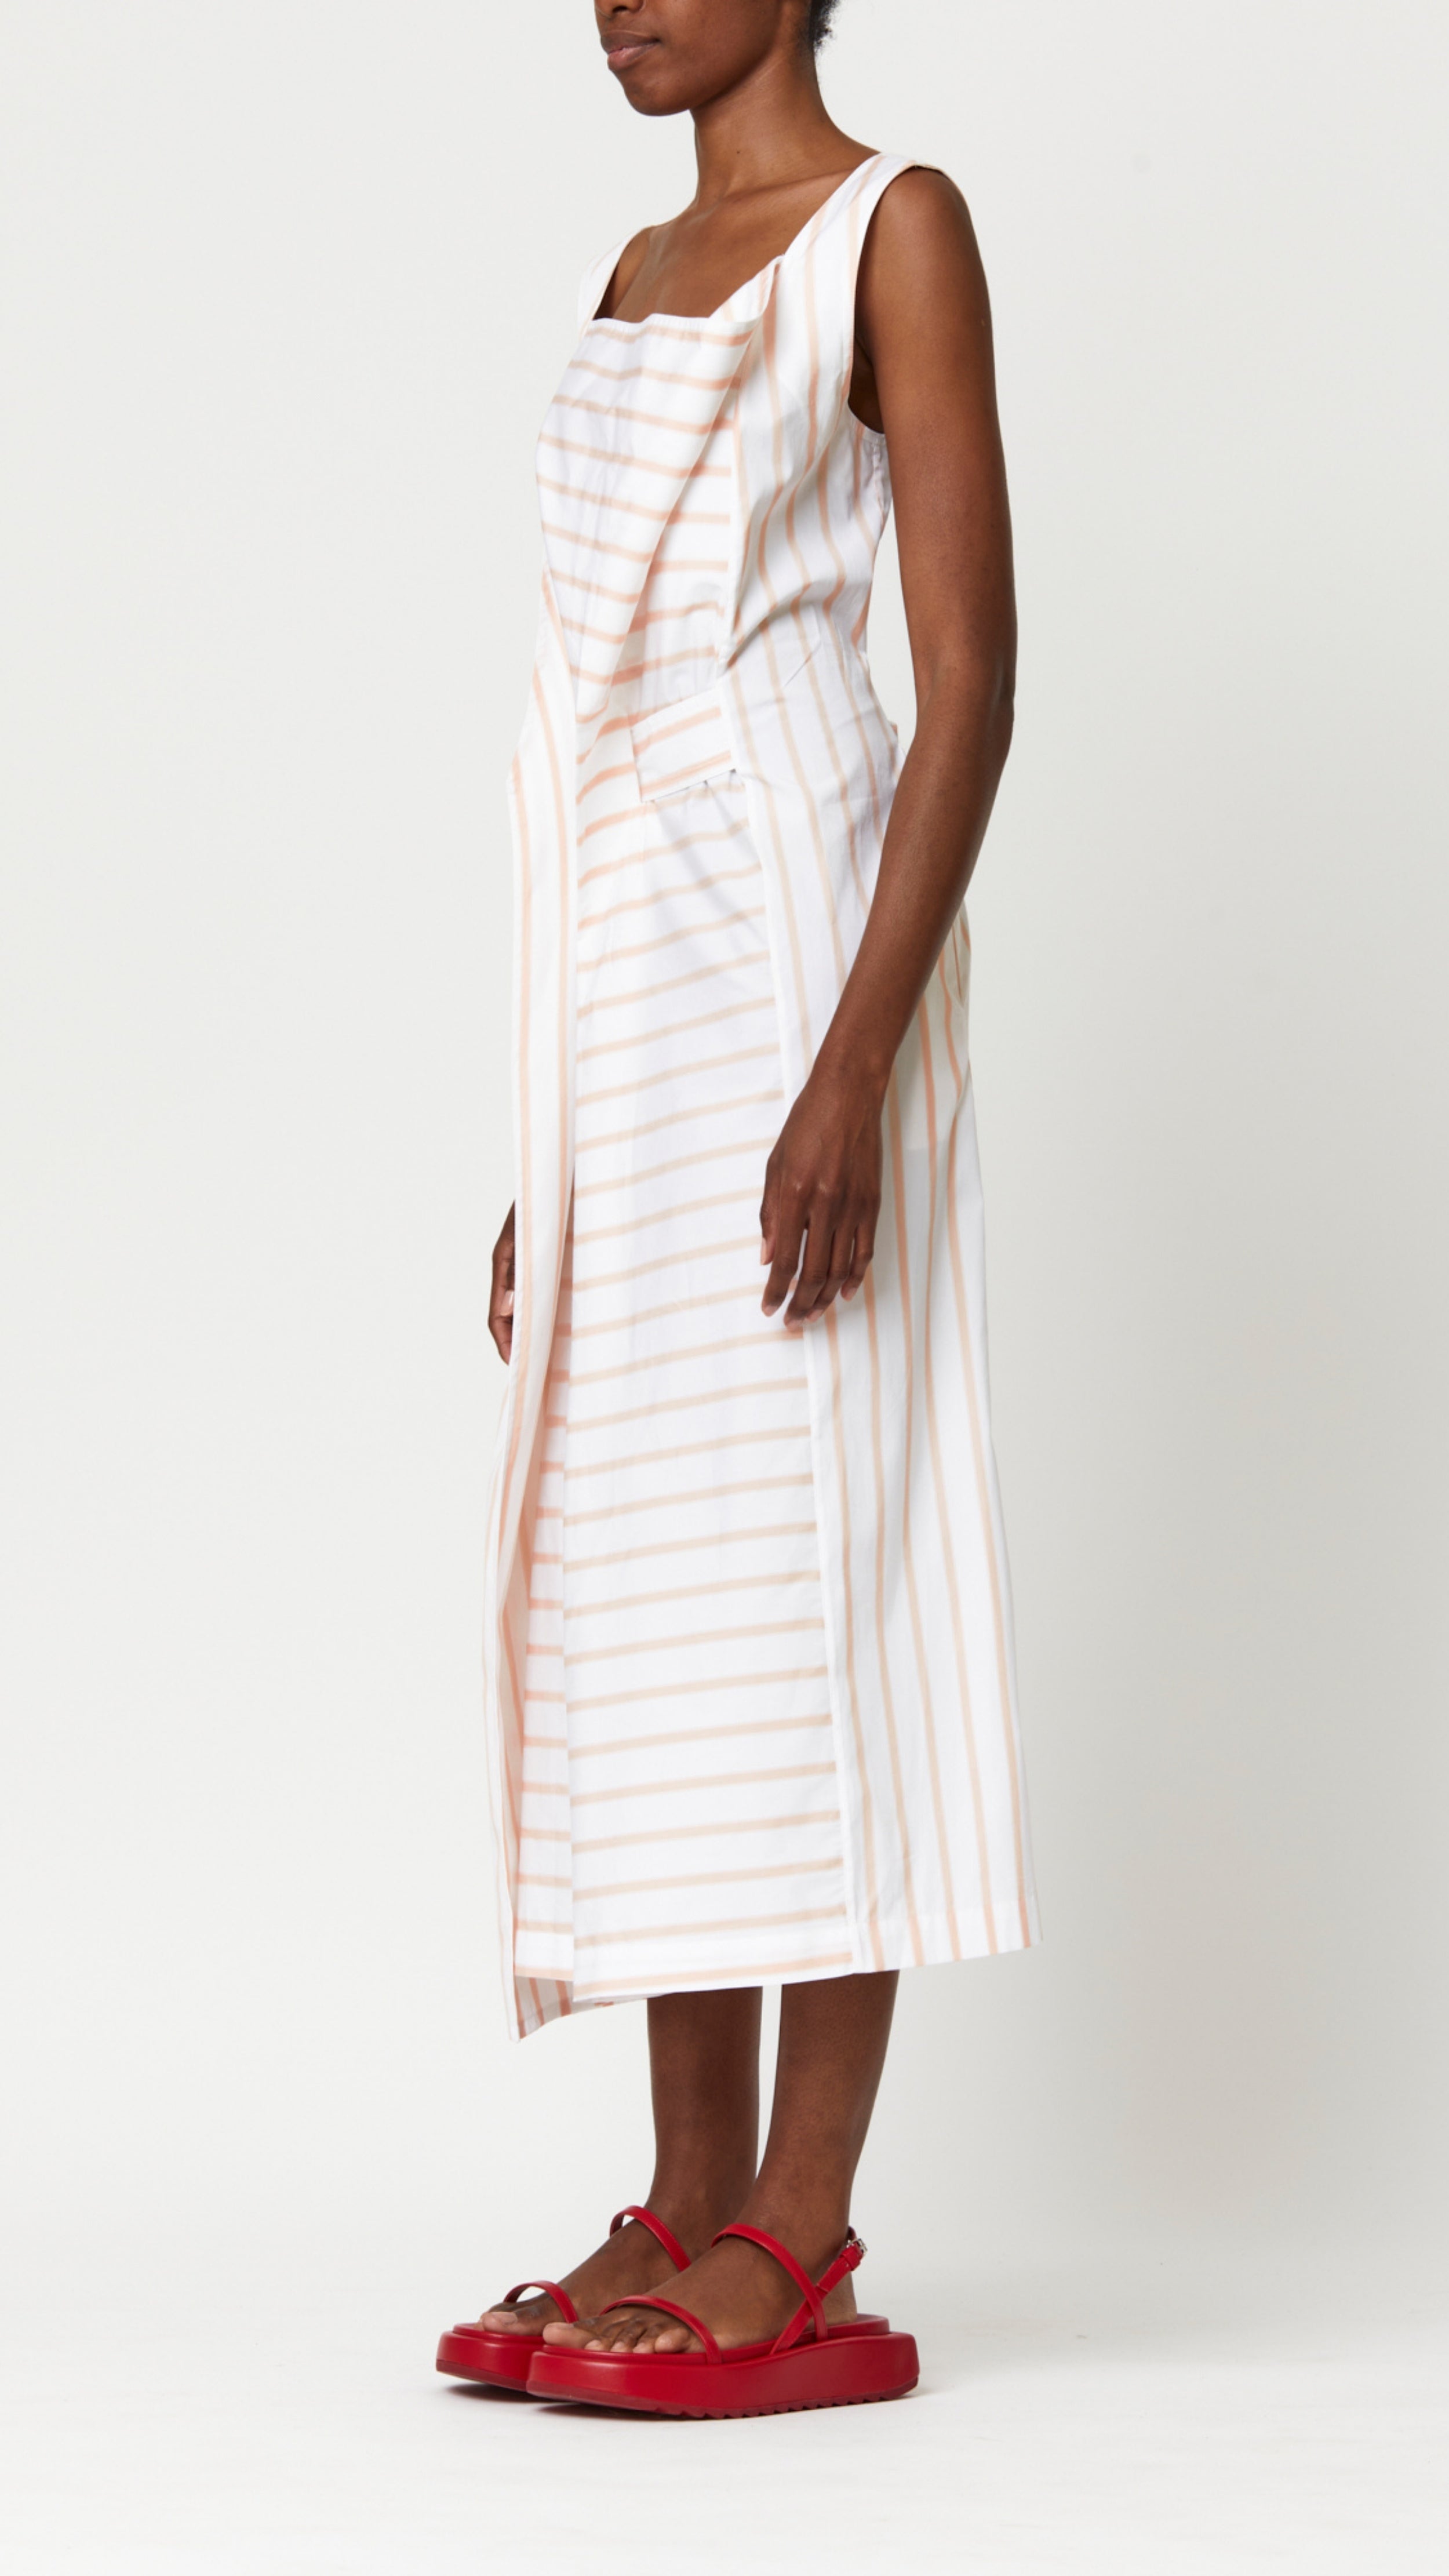 Plan C Cotton Dress in Bellini Stripe Italian-made soft cotton midi dress with bellini stripes. With a square neckline, front draping and cinched waist with fabric belt. Shown on model facing side.